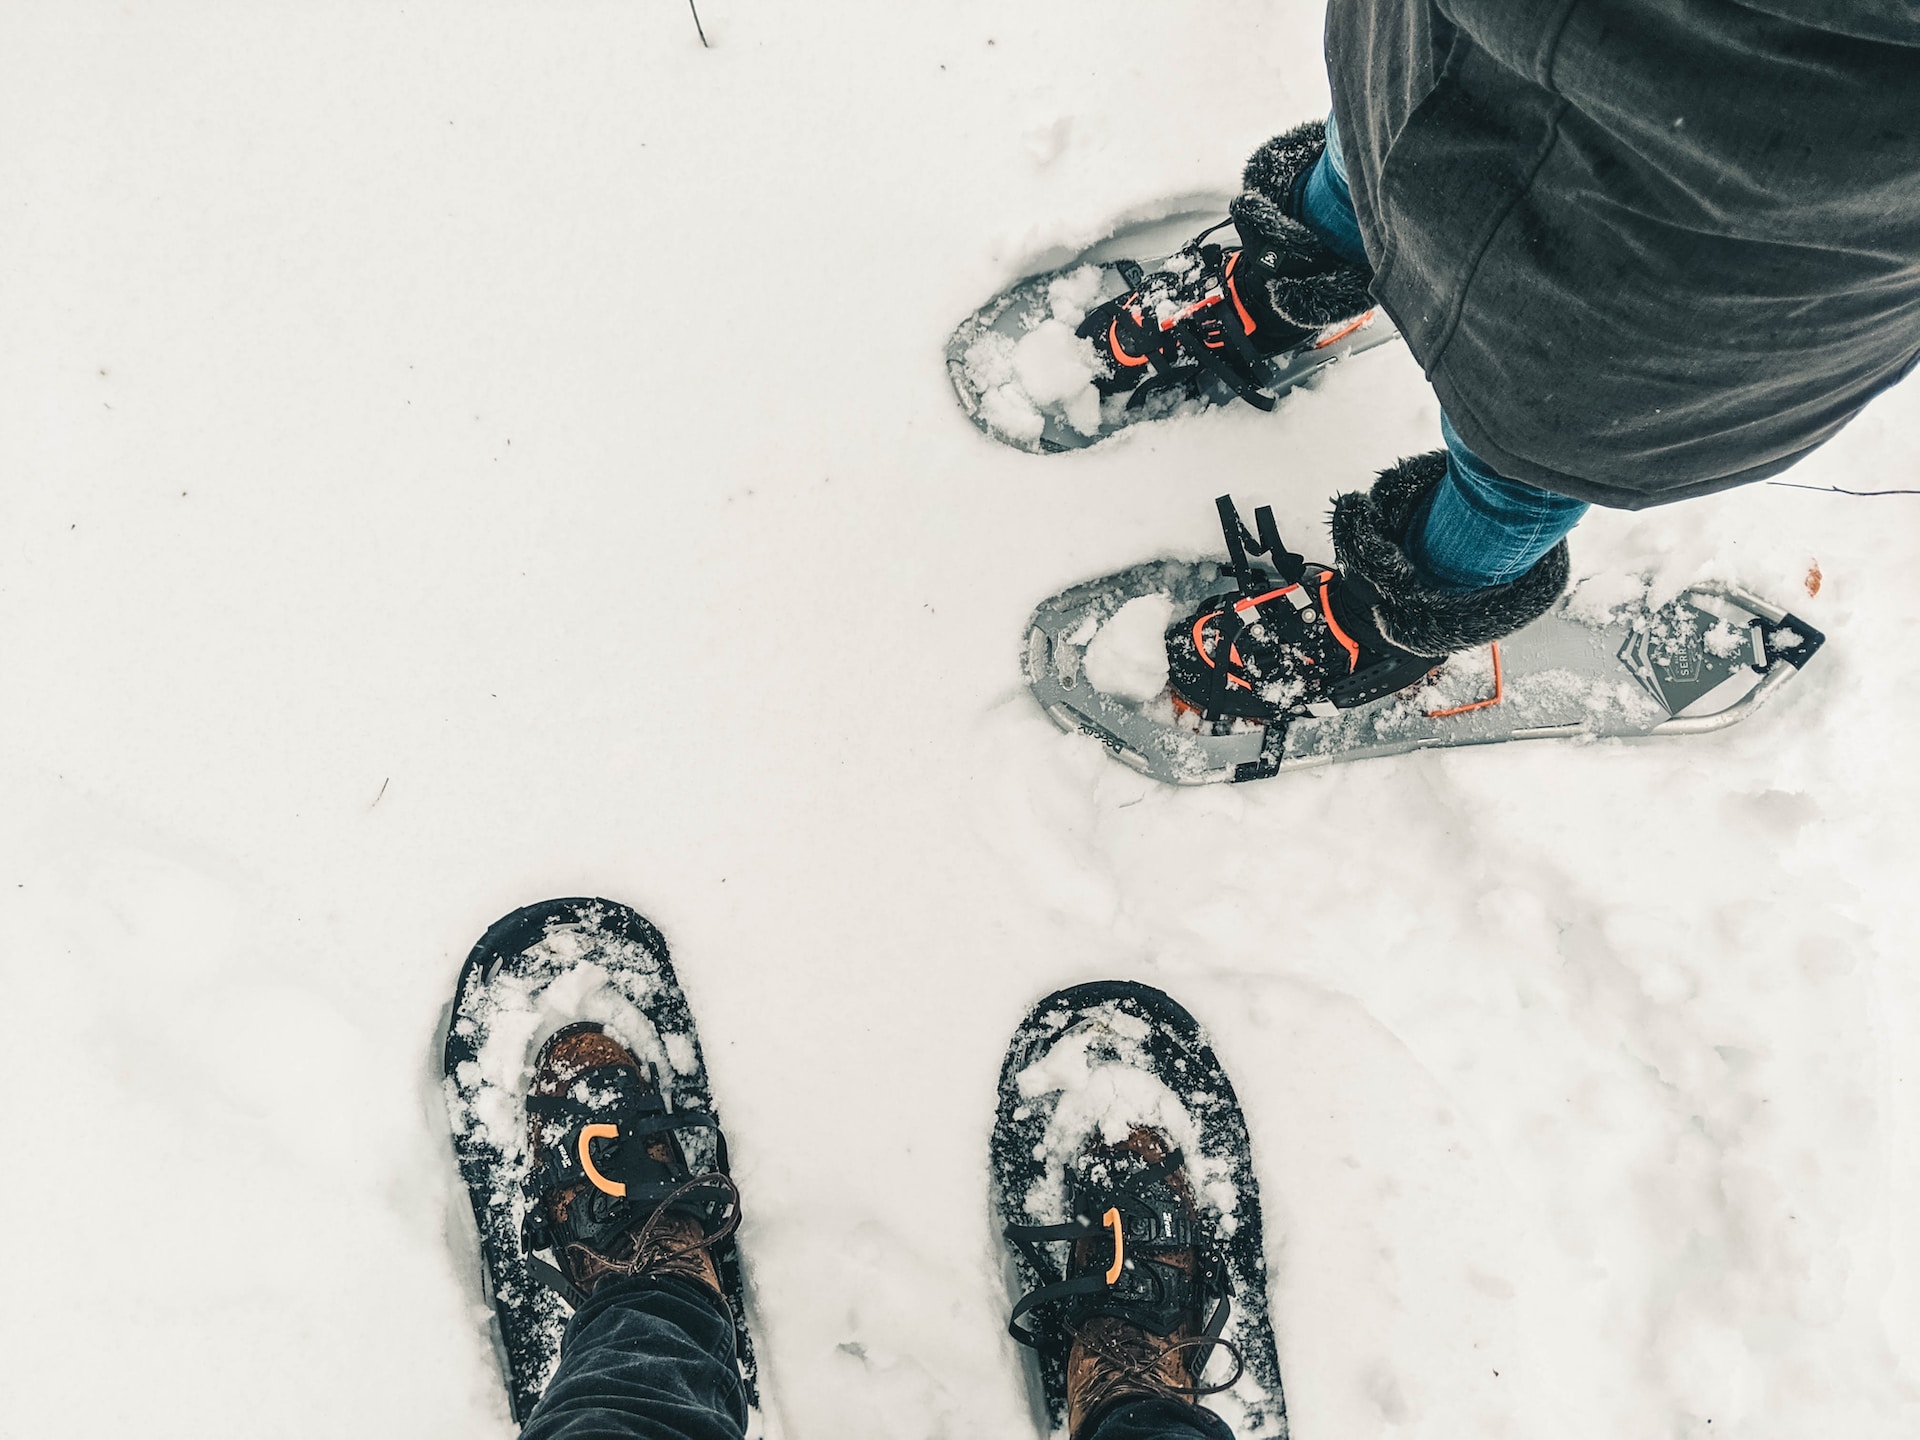 An image of two peoples' snowshoes, shot from a POV angle looking down at feet in the snow